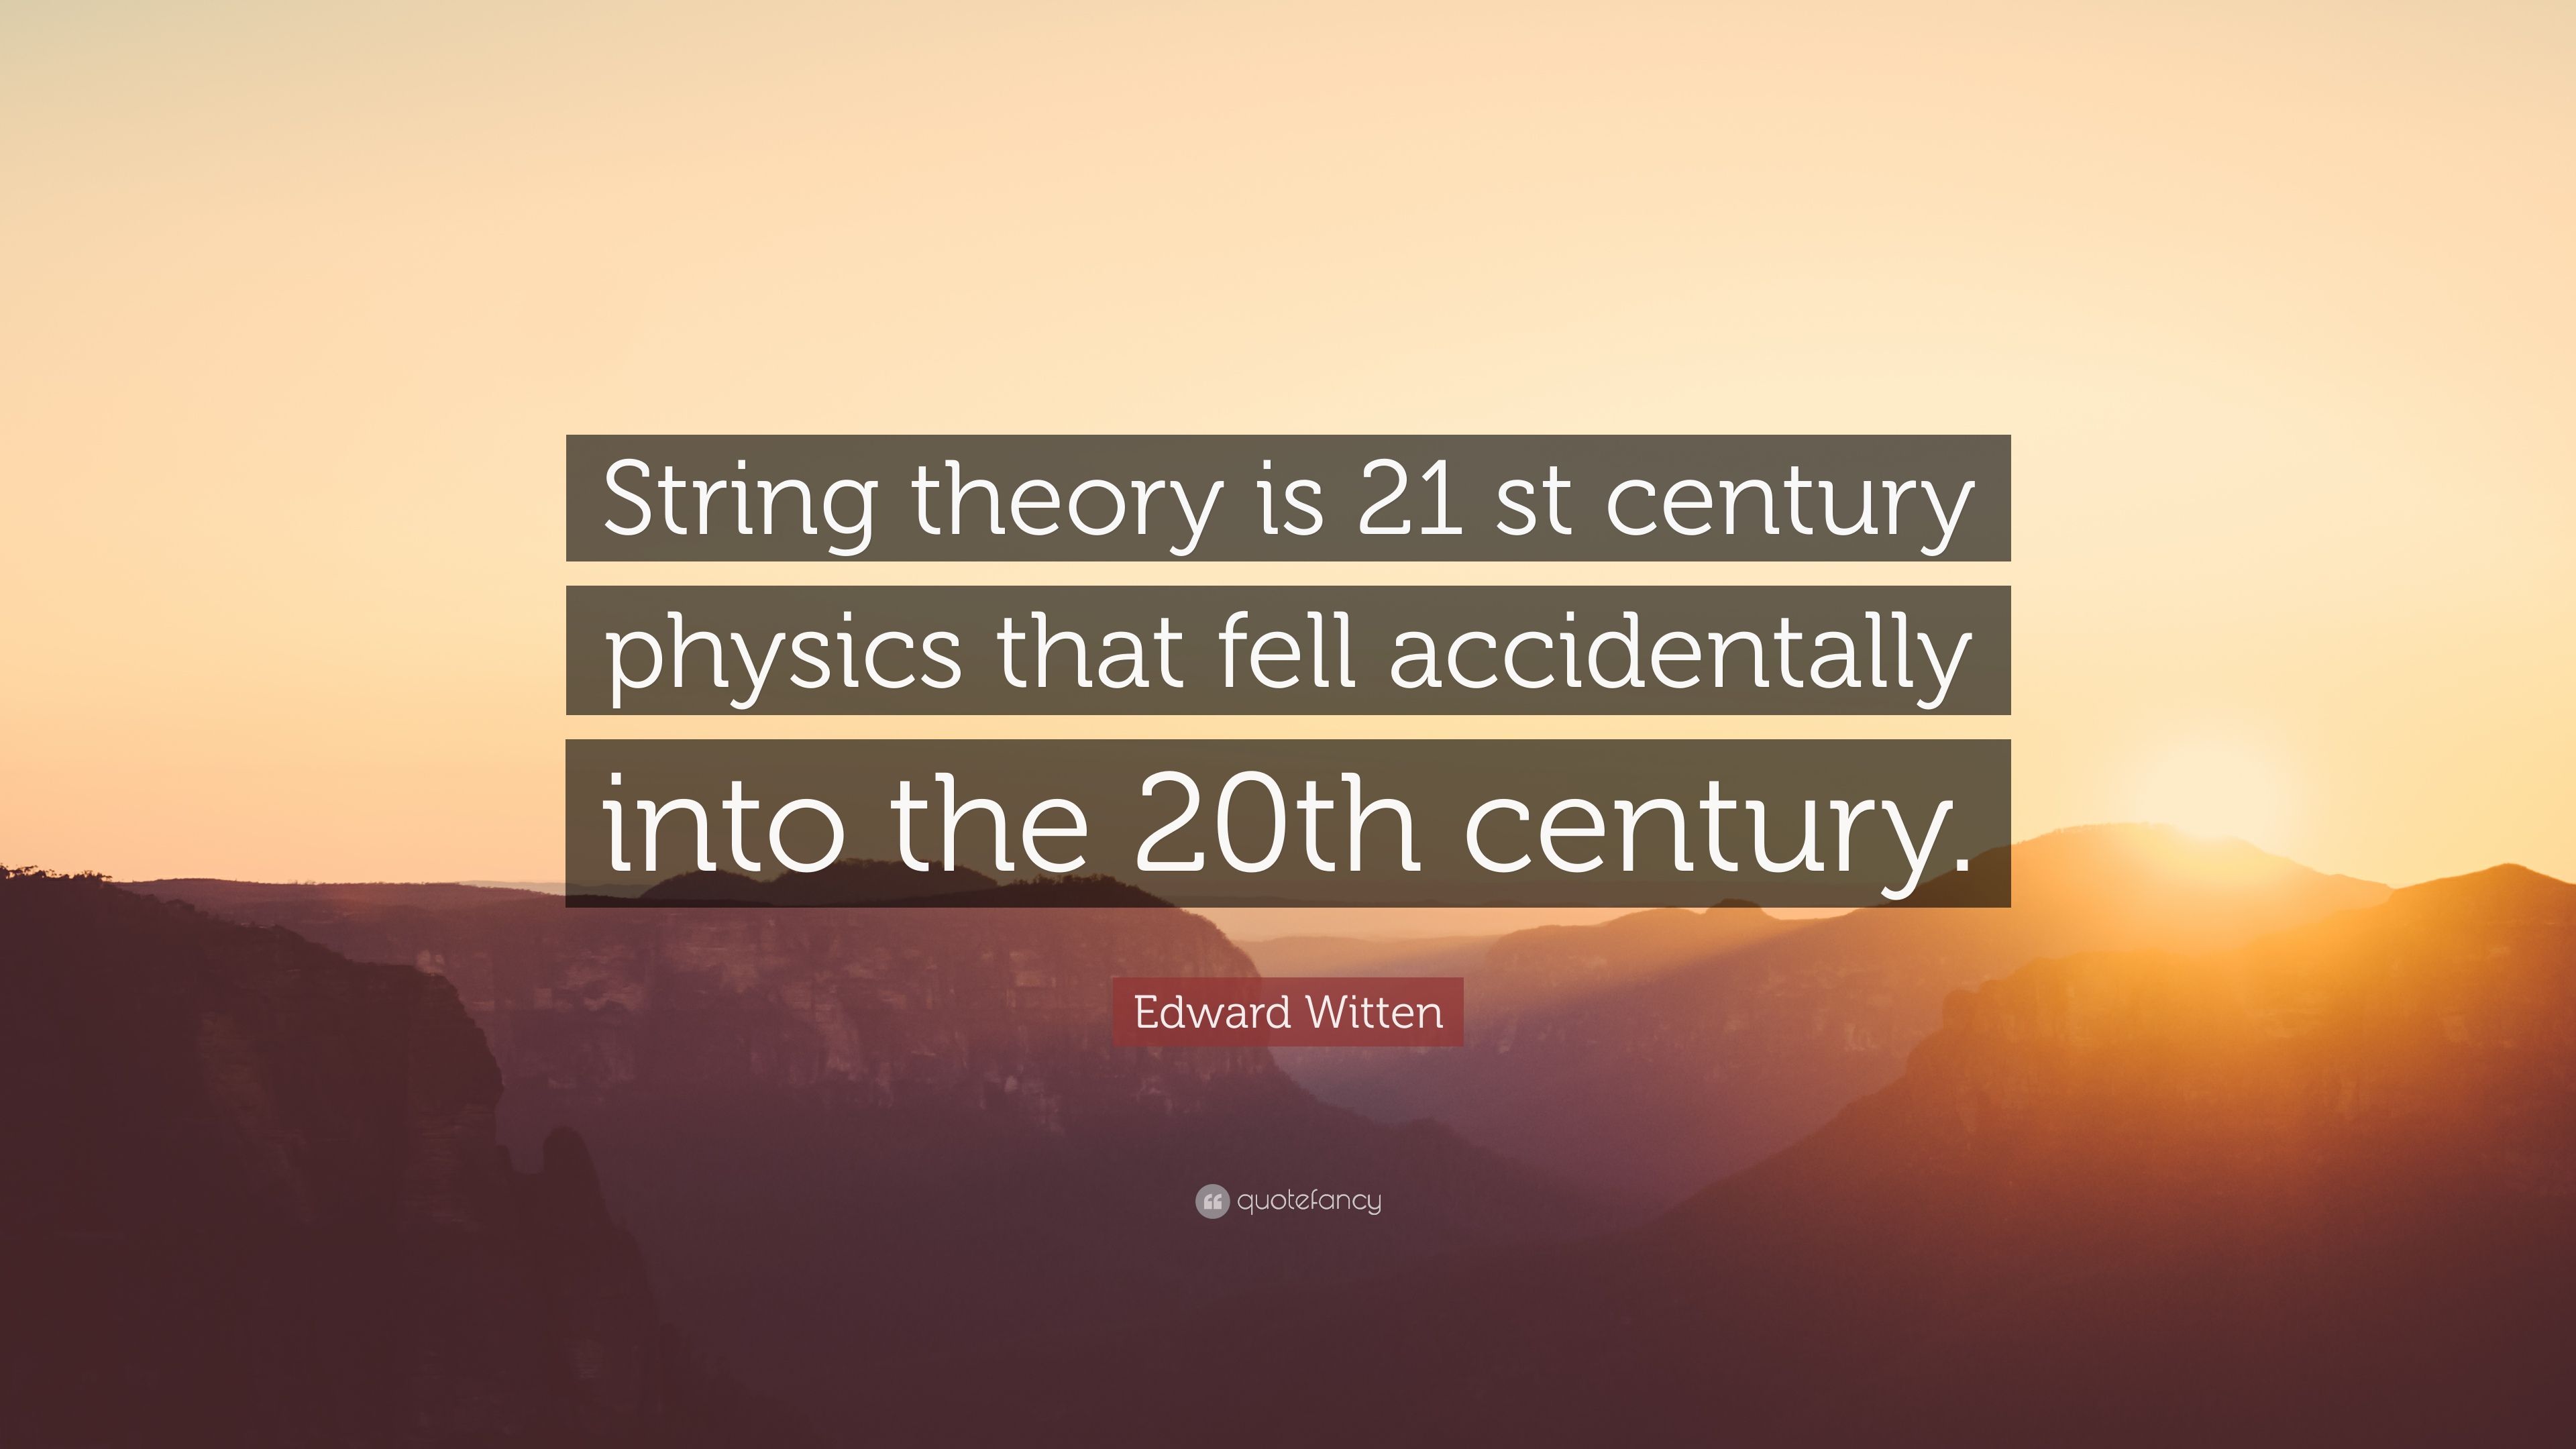 Edward Witten Quote: “String theory is 21 st century physics that fell accidentally into the 20th century.” (7 wallpaper)